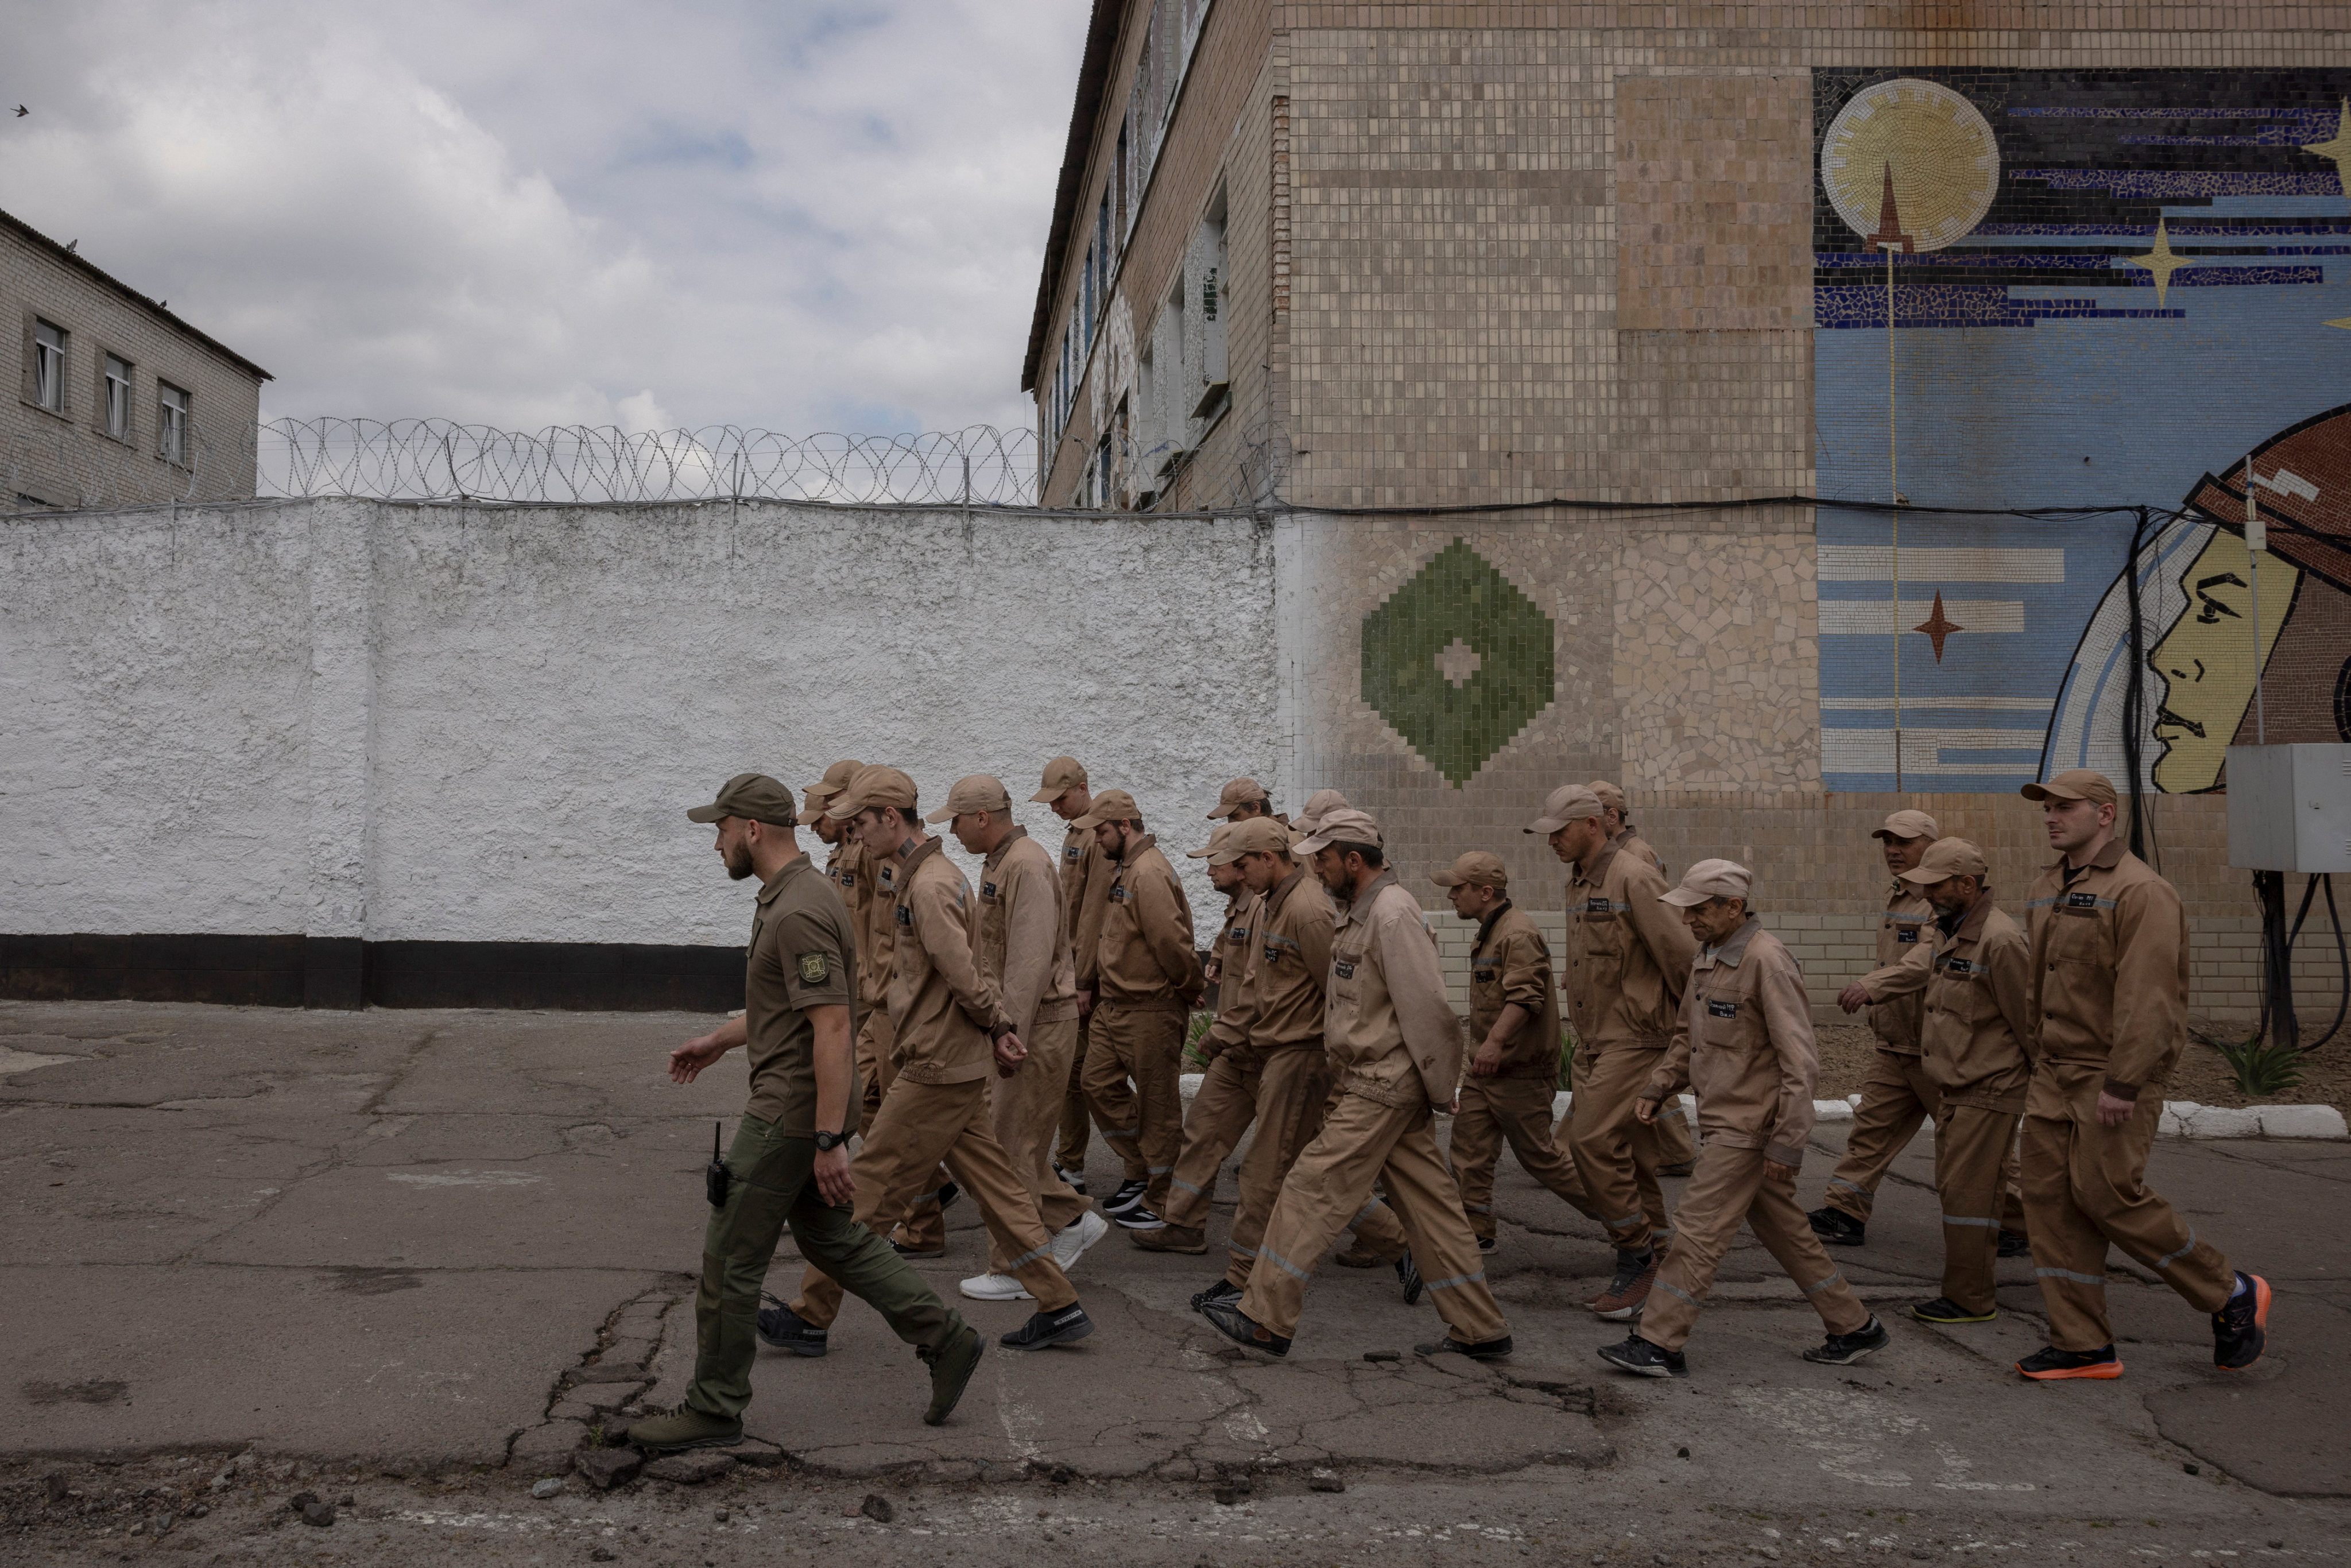 Inmates walk in a prison yard following a government offer to recruit some convicts for the military, in a prison colony in the Kyiv region. Photo: Reuters